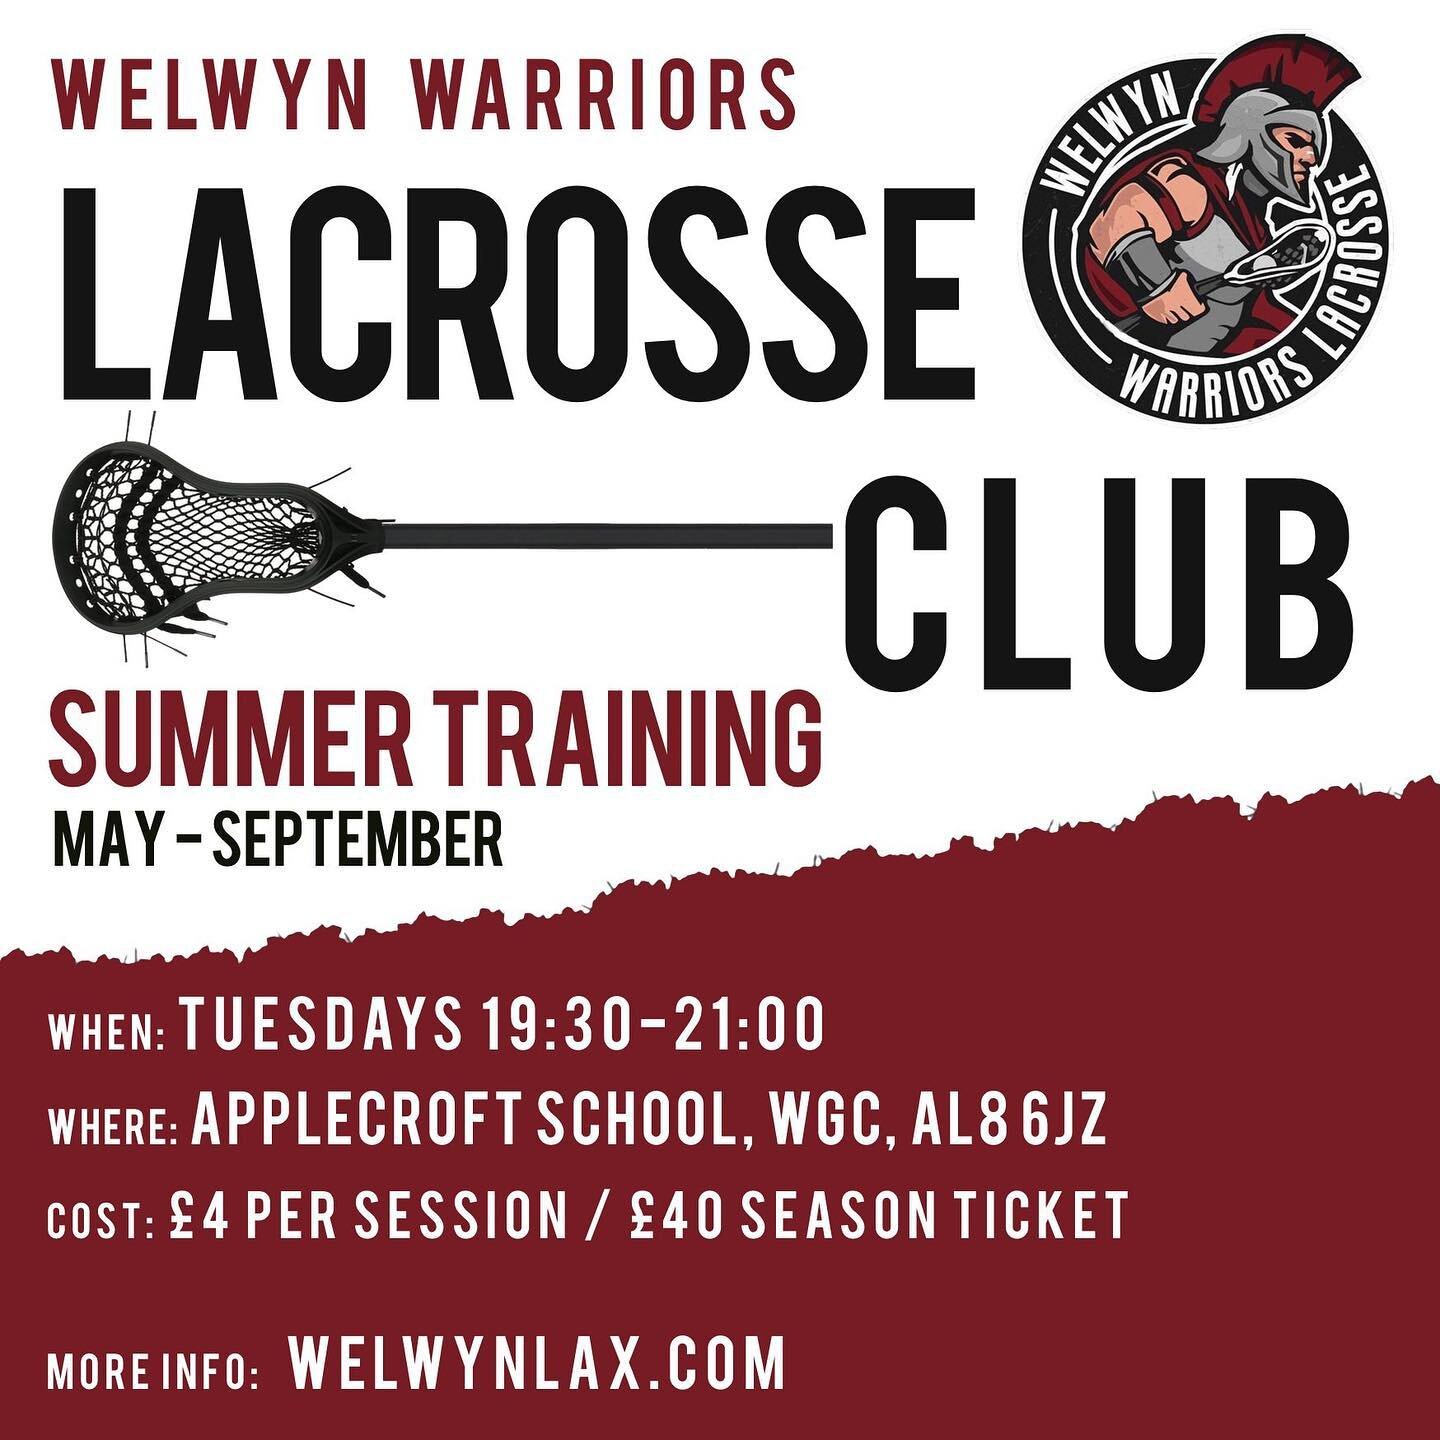 Summer sessions start this evening! If you&rsquo;re new to the club your FIRST session is FREE!! Come on down whether you&rsquo;re new to the sport, still at uni but want to develop your game or want to start playing again. #welwynlacrosse #welwynlax